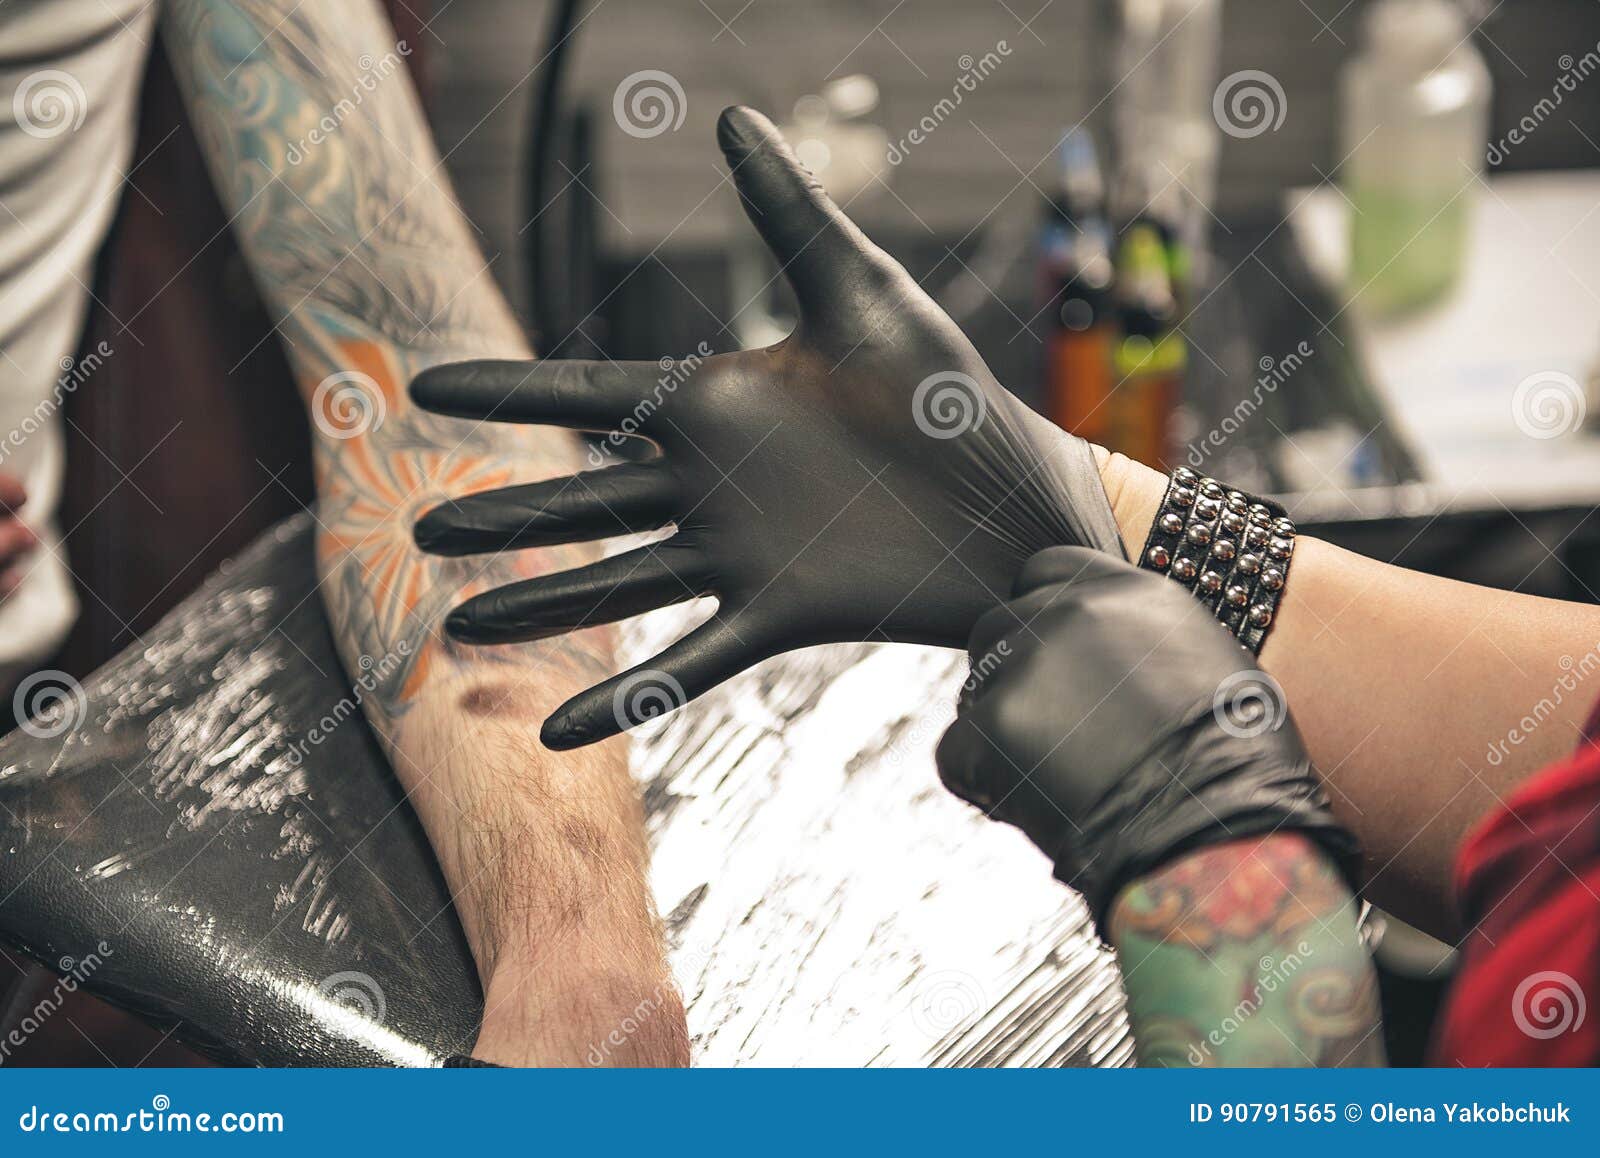 Woman Arm Wearing Gloves before Creating Tattoo Stock Image - Image of safety, indoor: 90791565